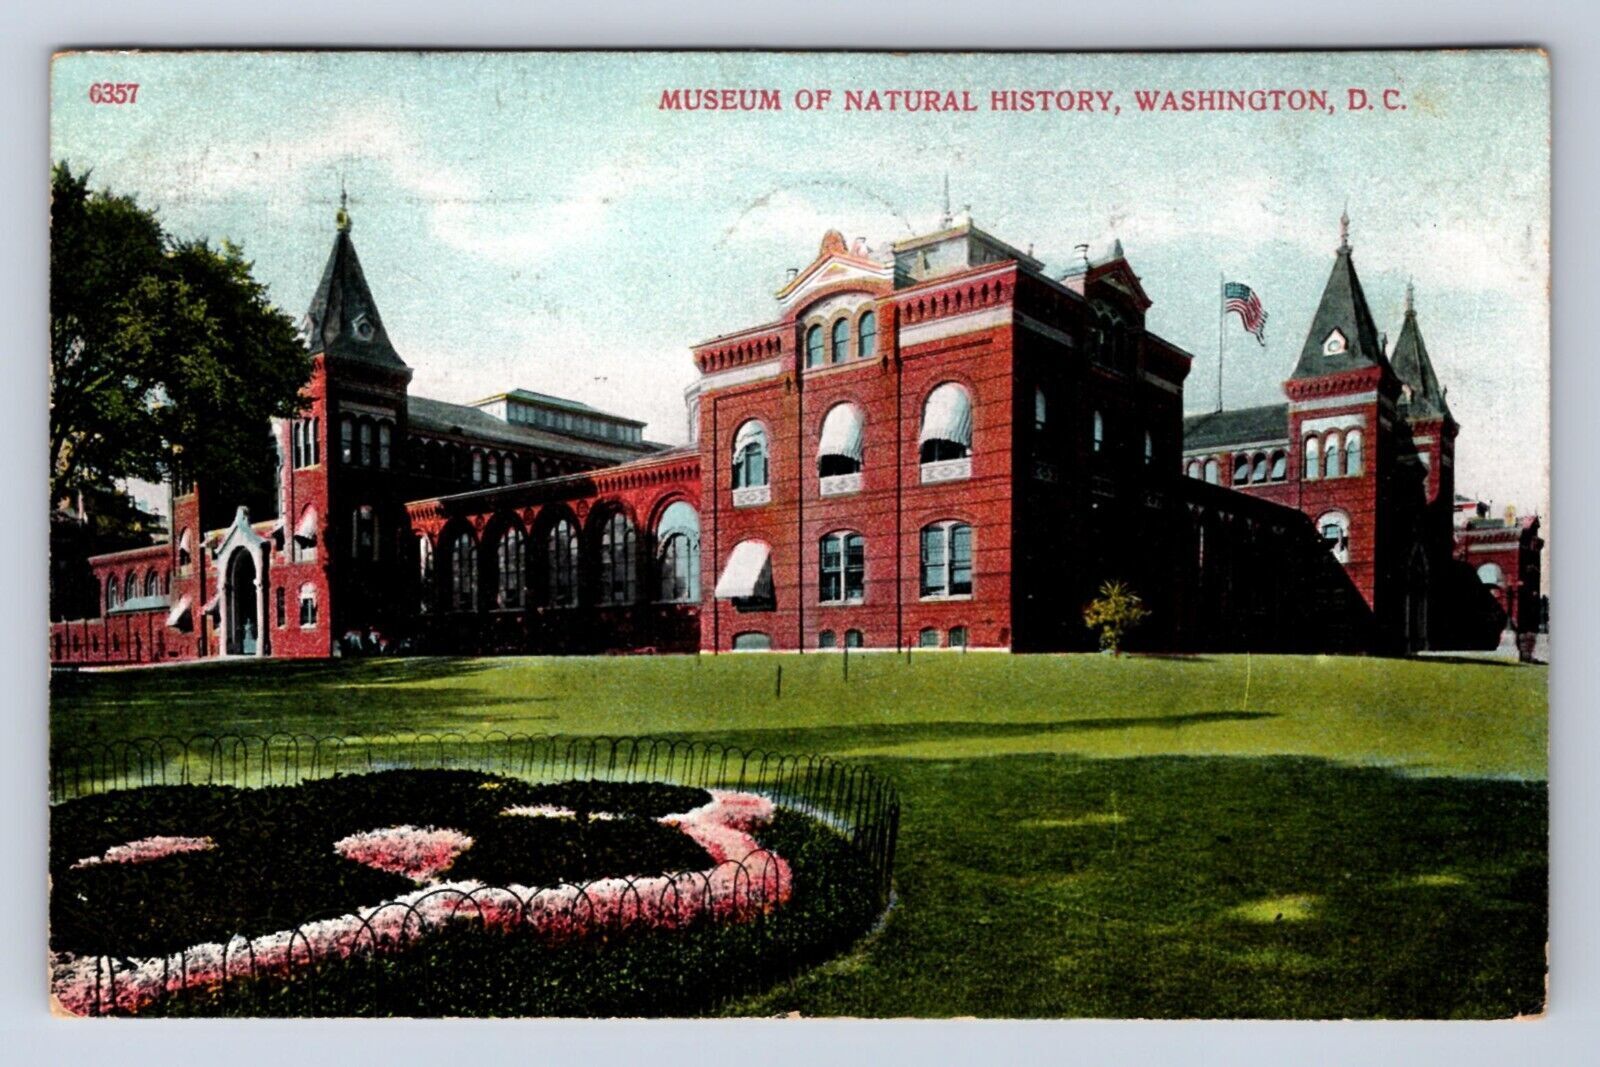 VINTAGE 1900S MUSEUM OF NATURAL HISTORY WASHINGTON DC STREET VIEW POSTCARD FO